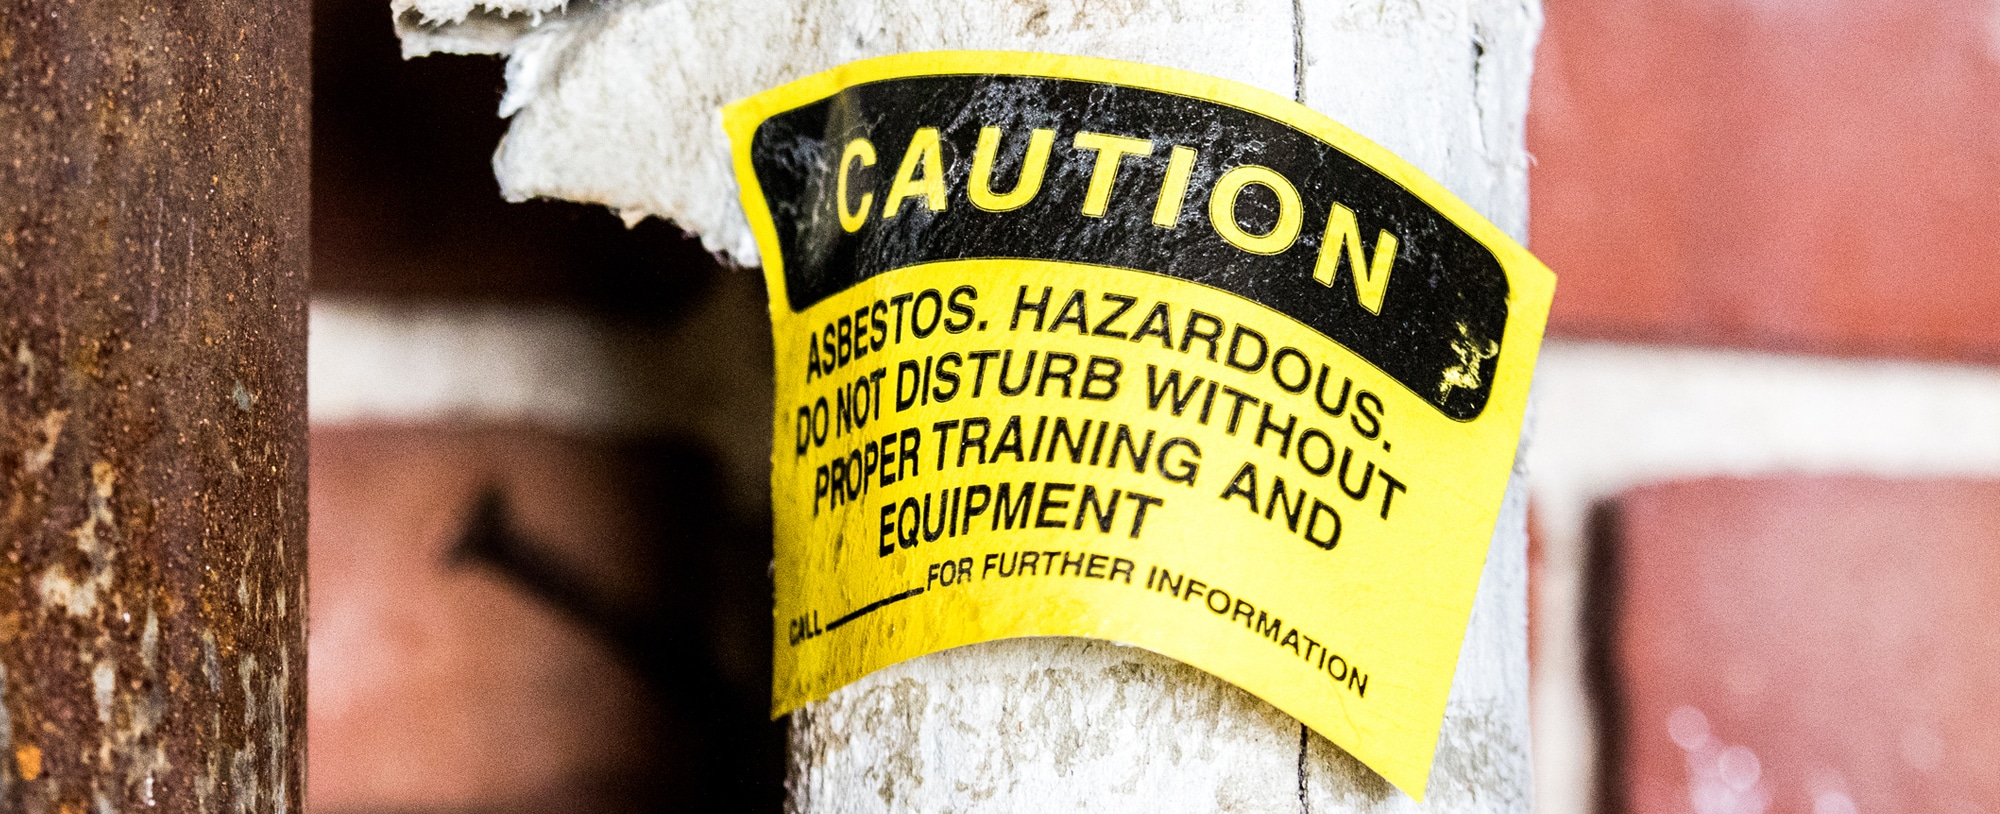 What materials need specialised asbestos removal - What materials need specialised asbestos removal?